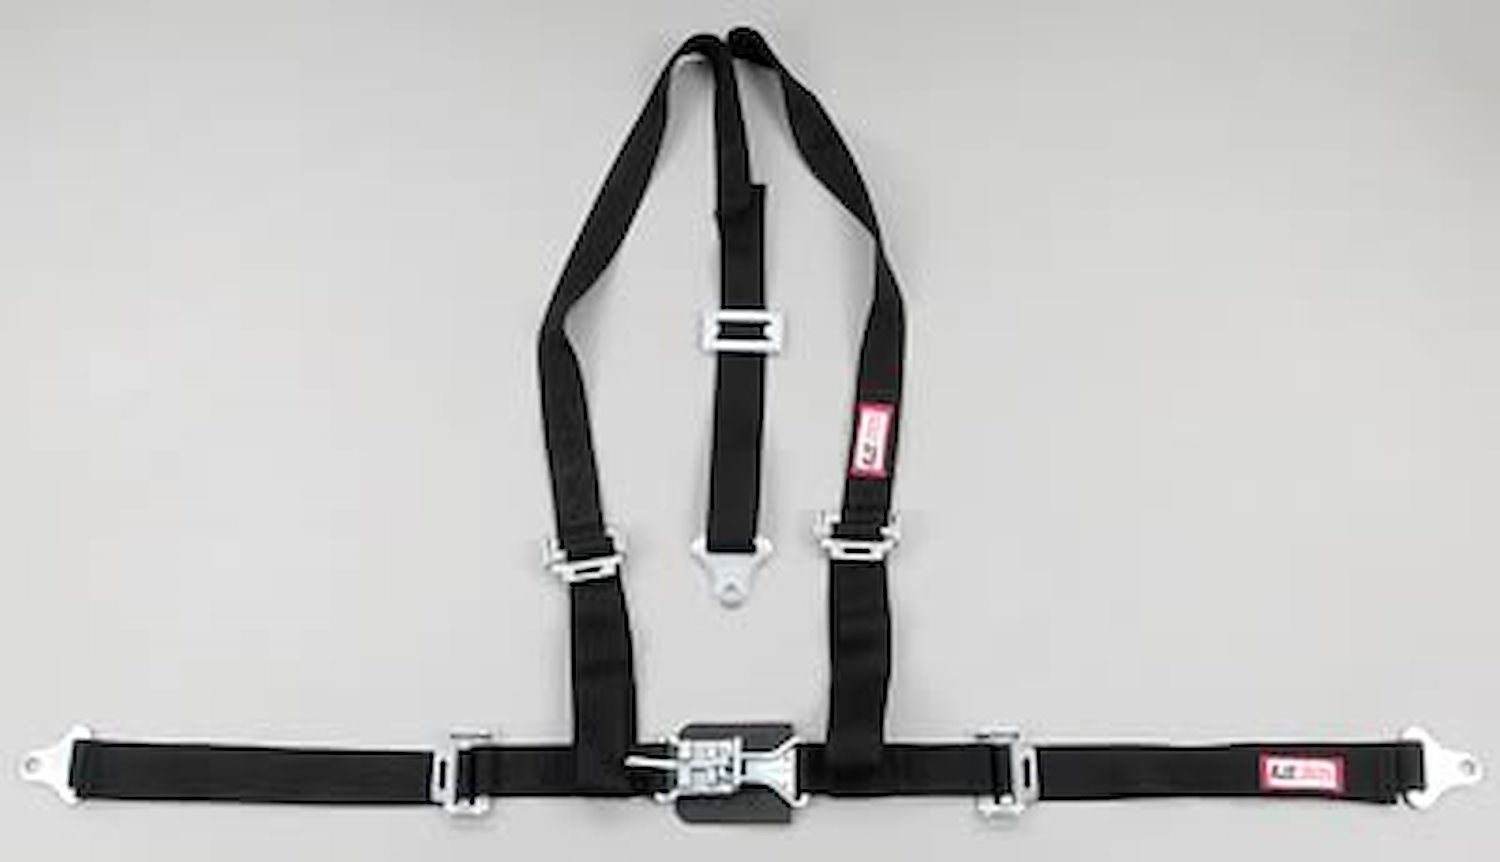 NON-SFI L&L HARNESS 2 PULL UP Lap Belt SEWN IN 2 S.H. INDIVIDUAL FLOOR Mount w/STERNUM STRAP ALL WRAP ENDS PURPLE